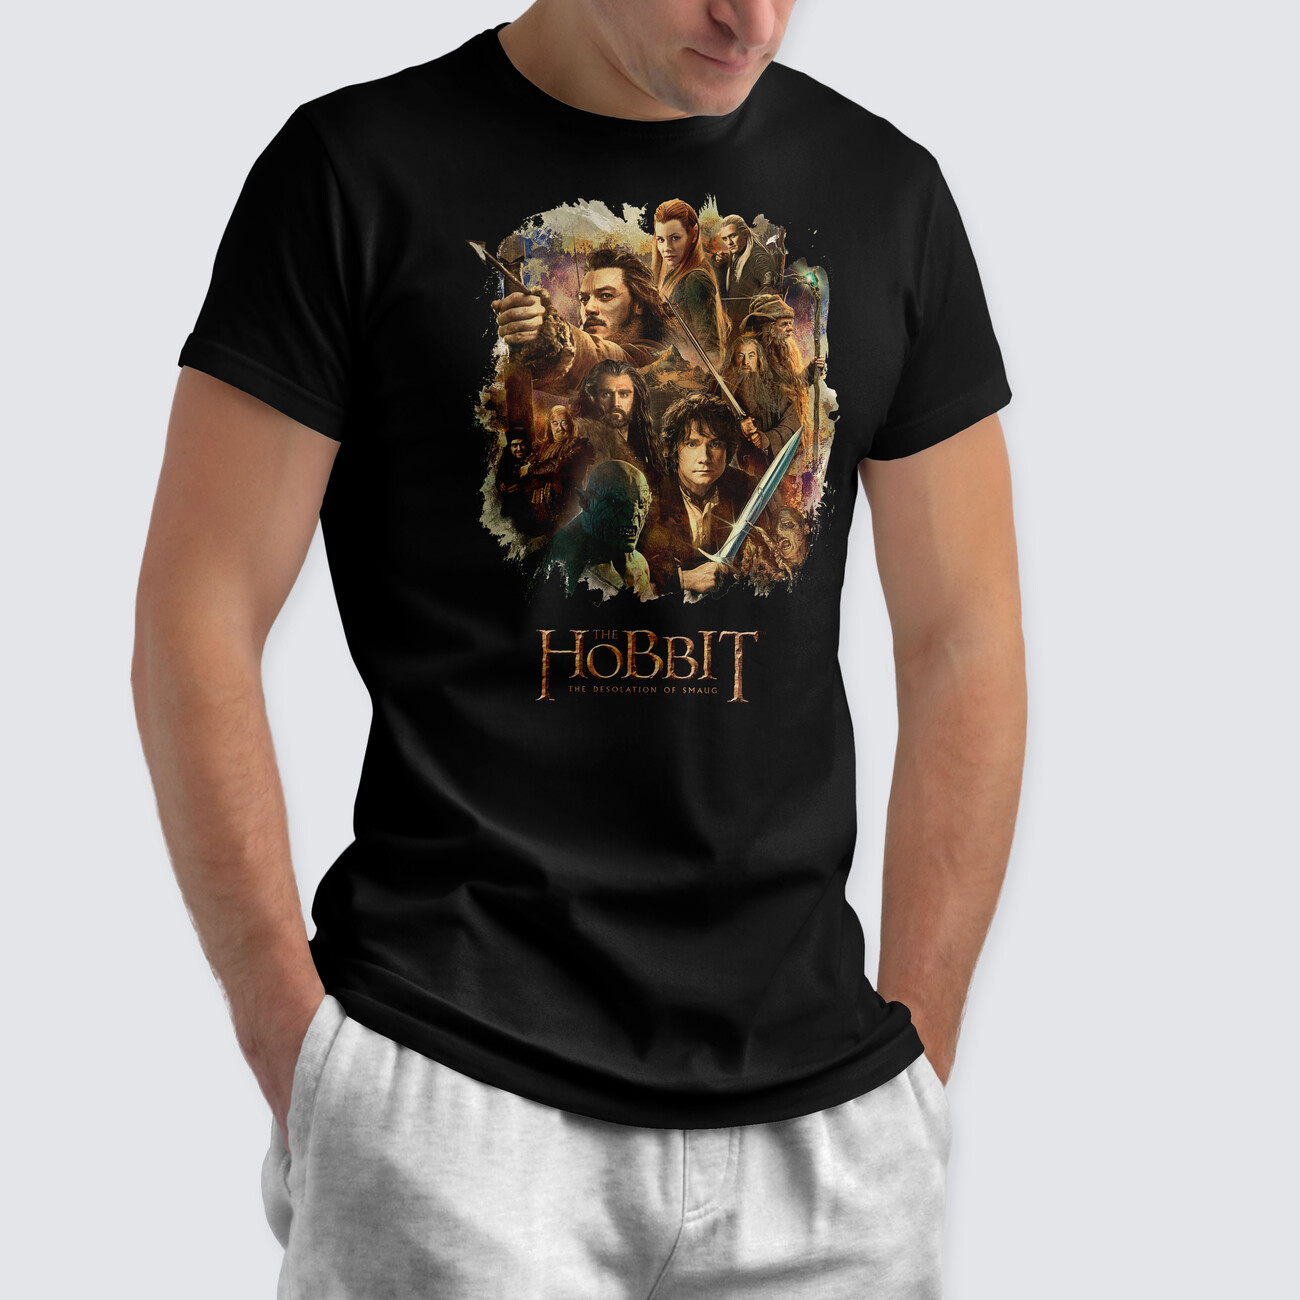 Hobbit: The Desolation of Smaug fans accessories - for Characters merchandise and | Clothes